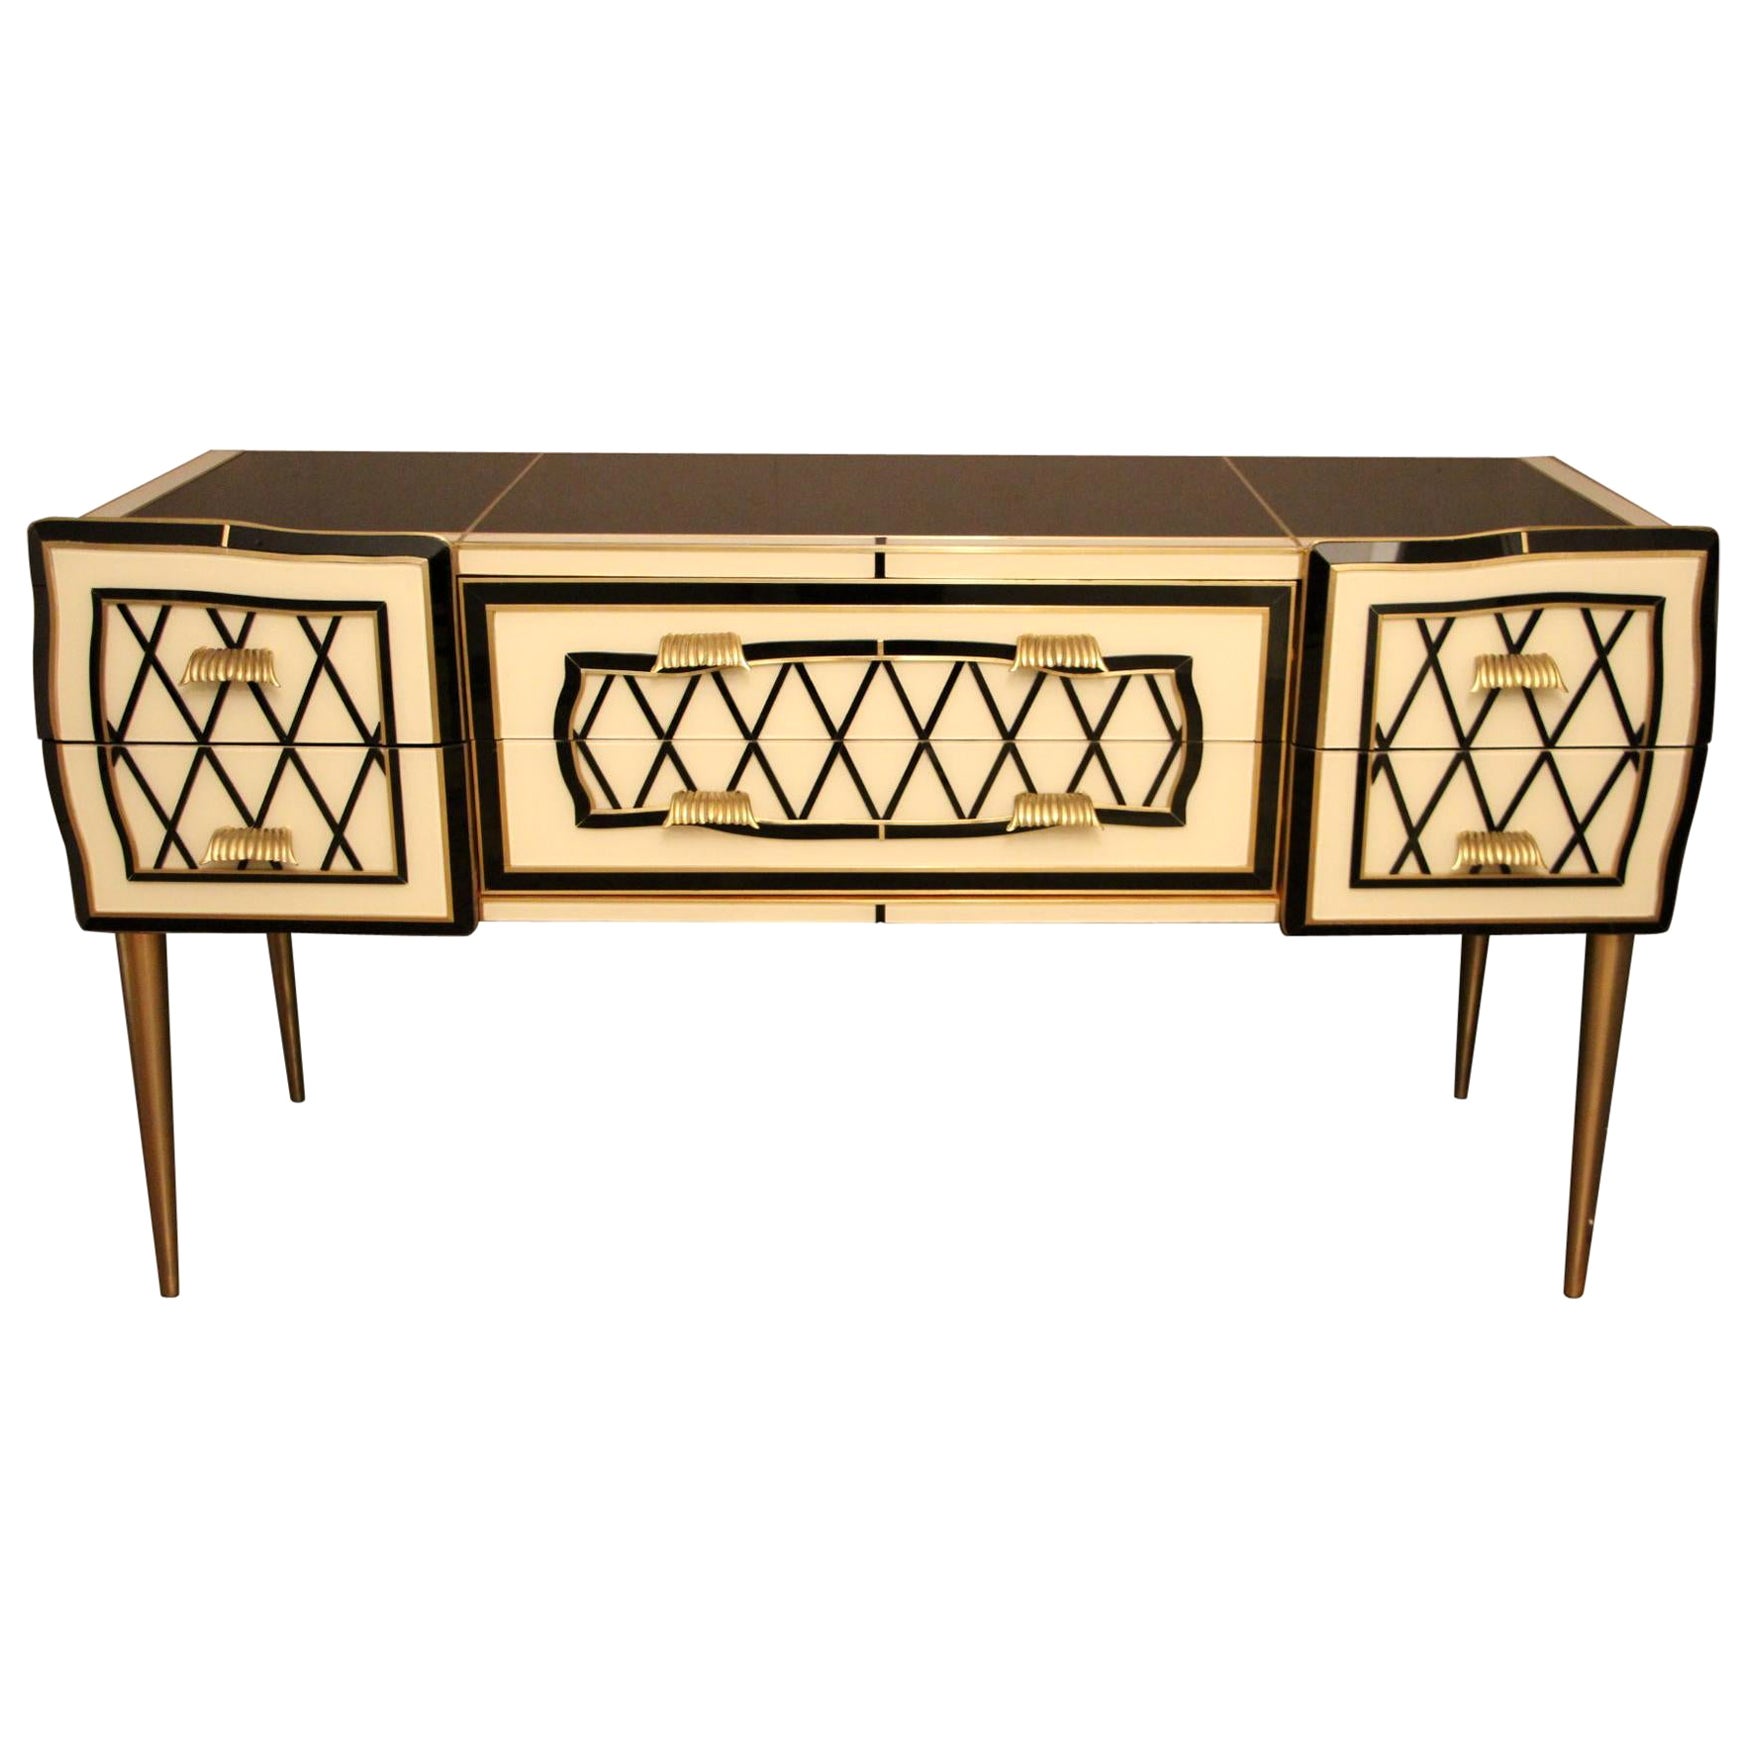 Murano Black and White Tinted Glass Commode or Sideboard with Brass Hardware